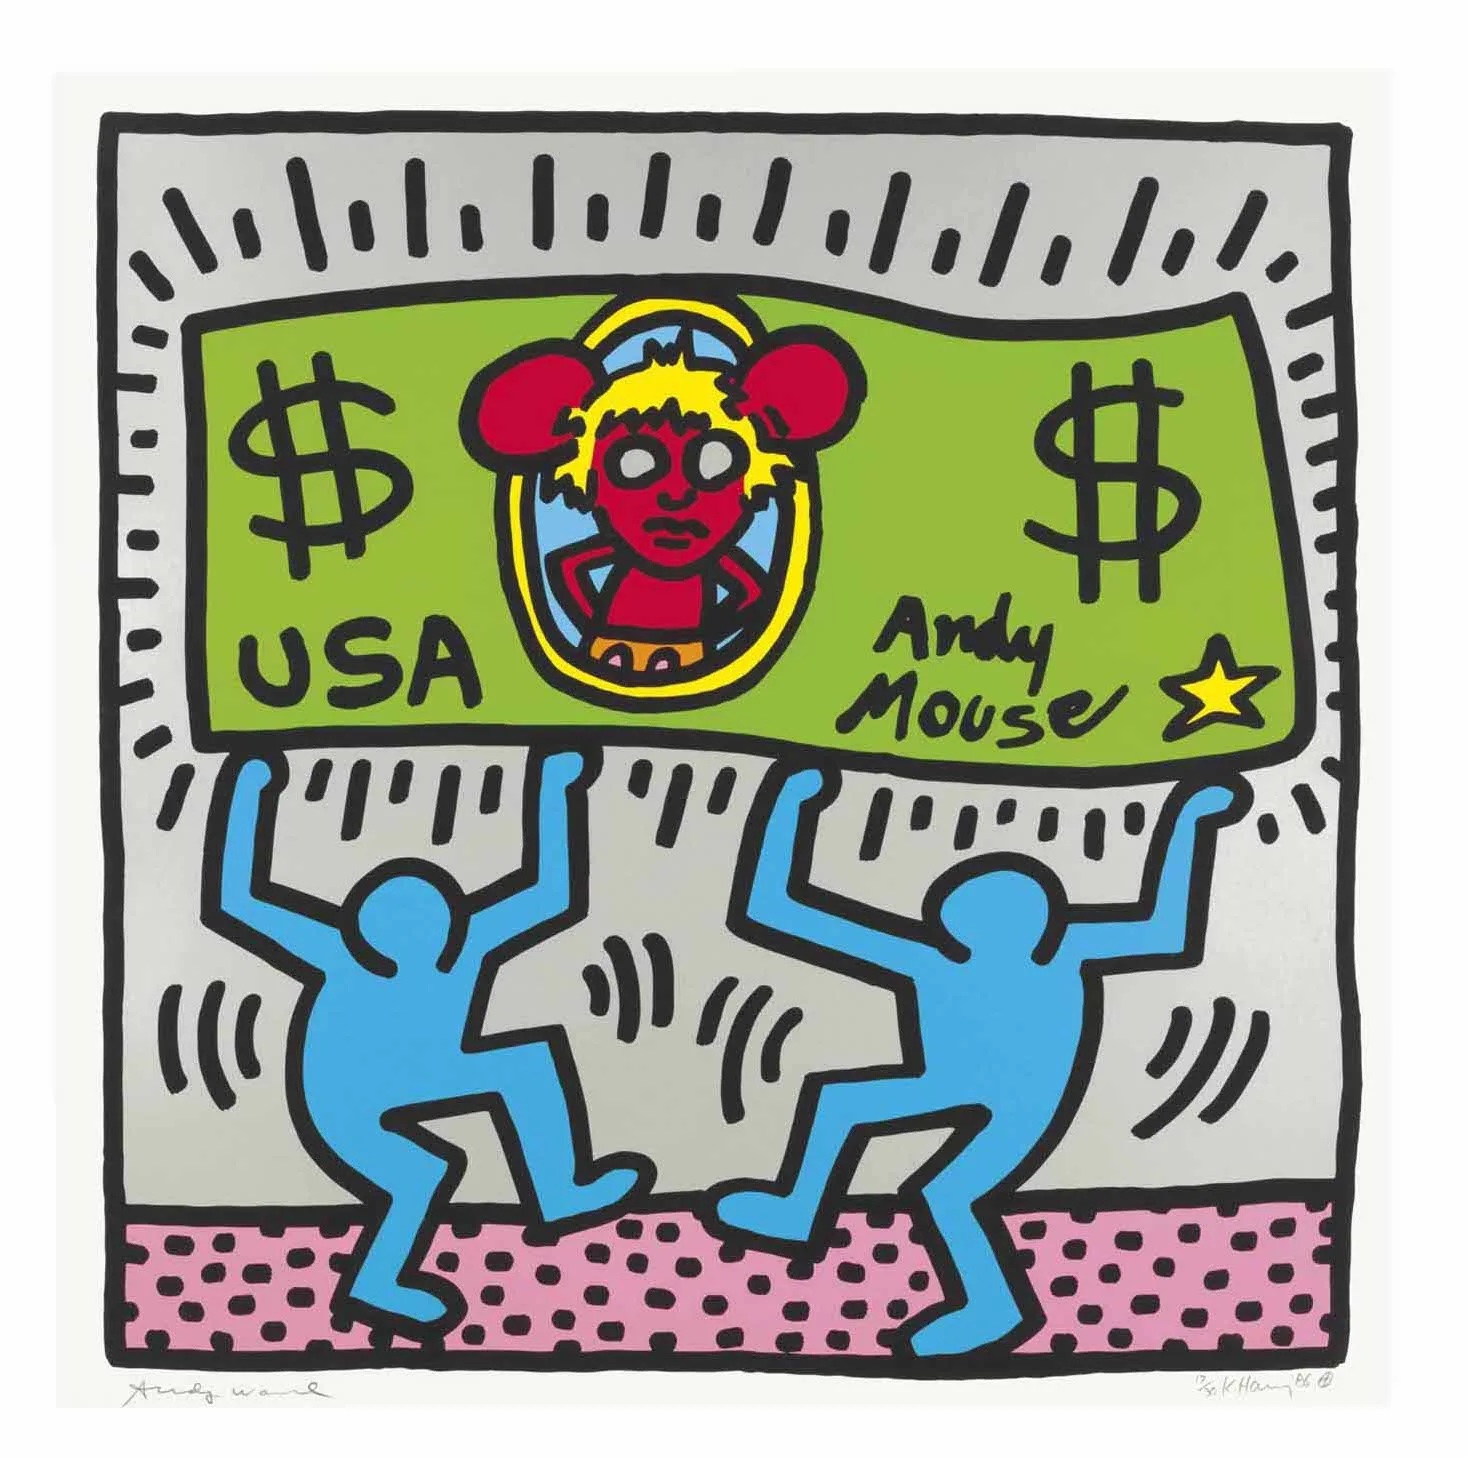 Andy Mouse 3 by Keith Haring, also signed by Andy Warhol.